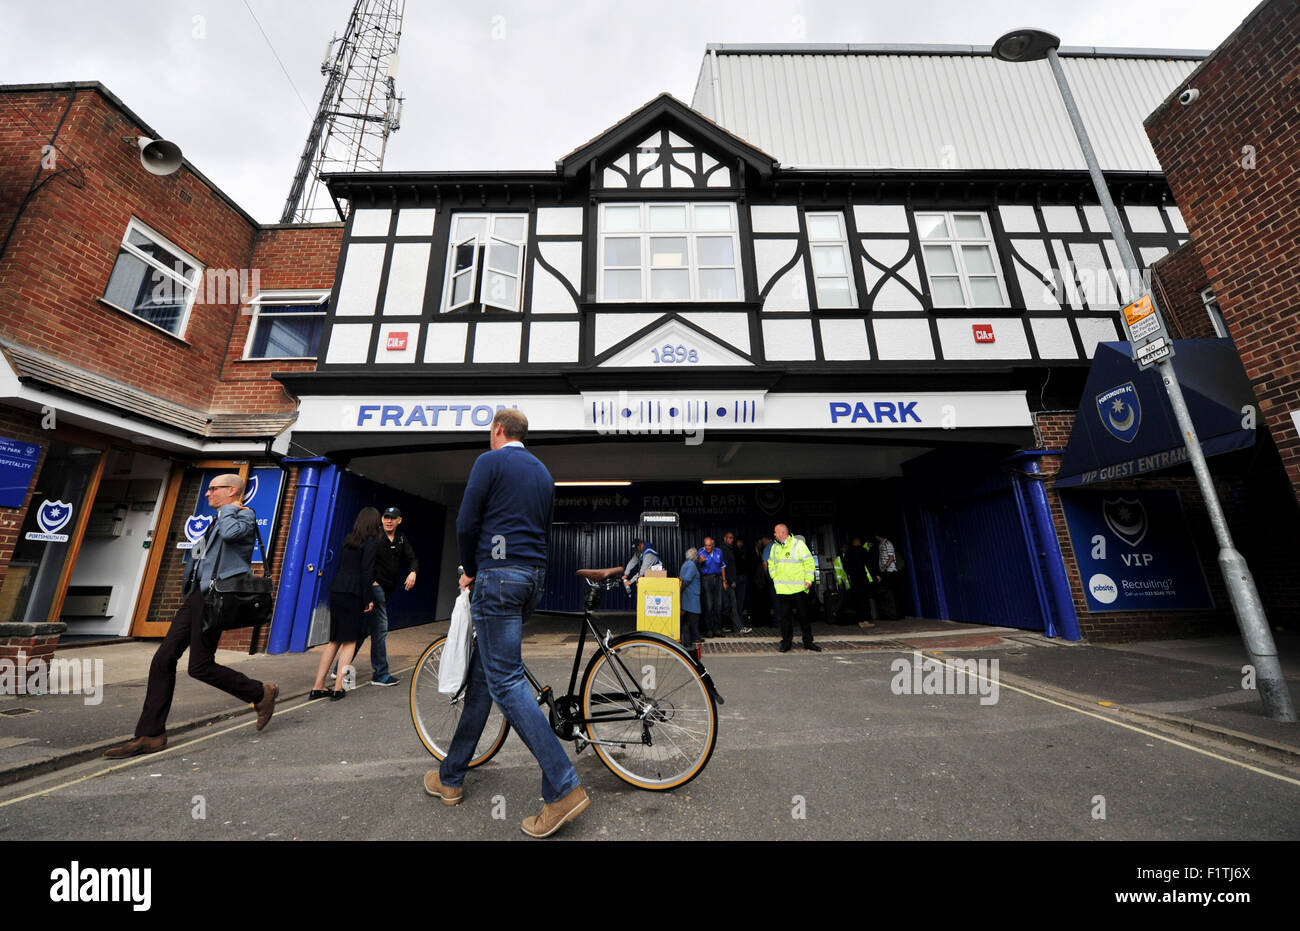 Portsmouth Hampshire UK - Fratton Park Football Ground - Editorial use only. No merchandising. For Football images FA and Premier League restrictions apply inc. no internet/mobile usage without FAPL license - for details contact Football Dataco Stock Photo